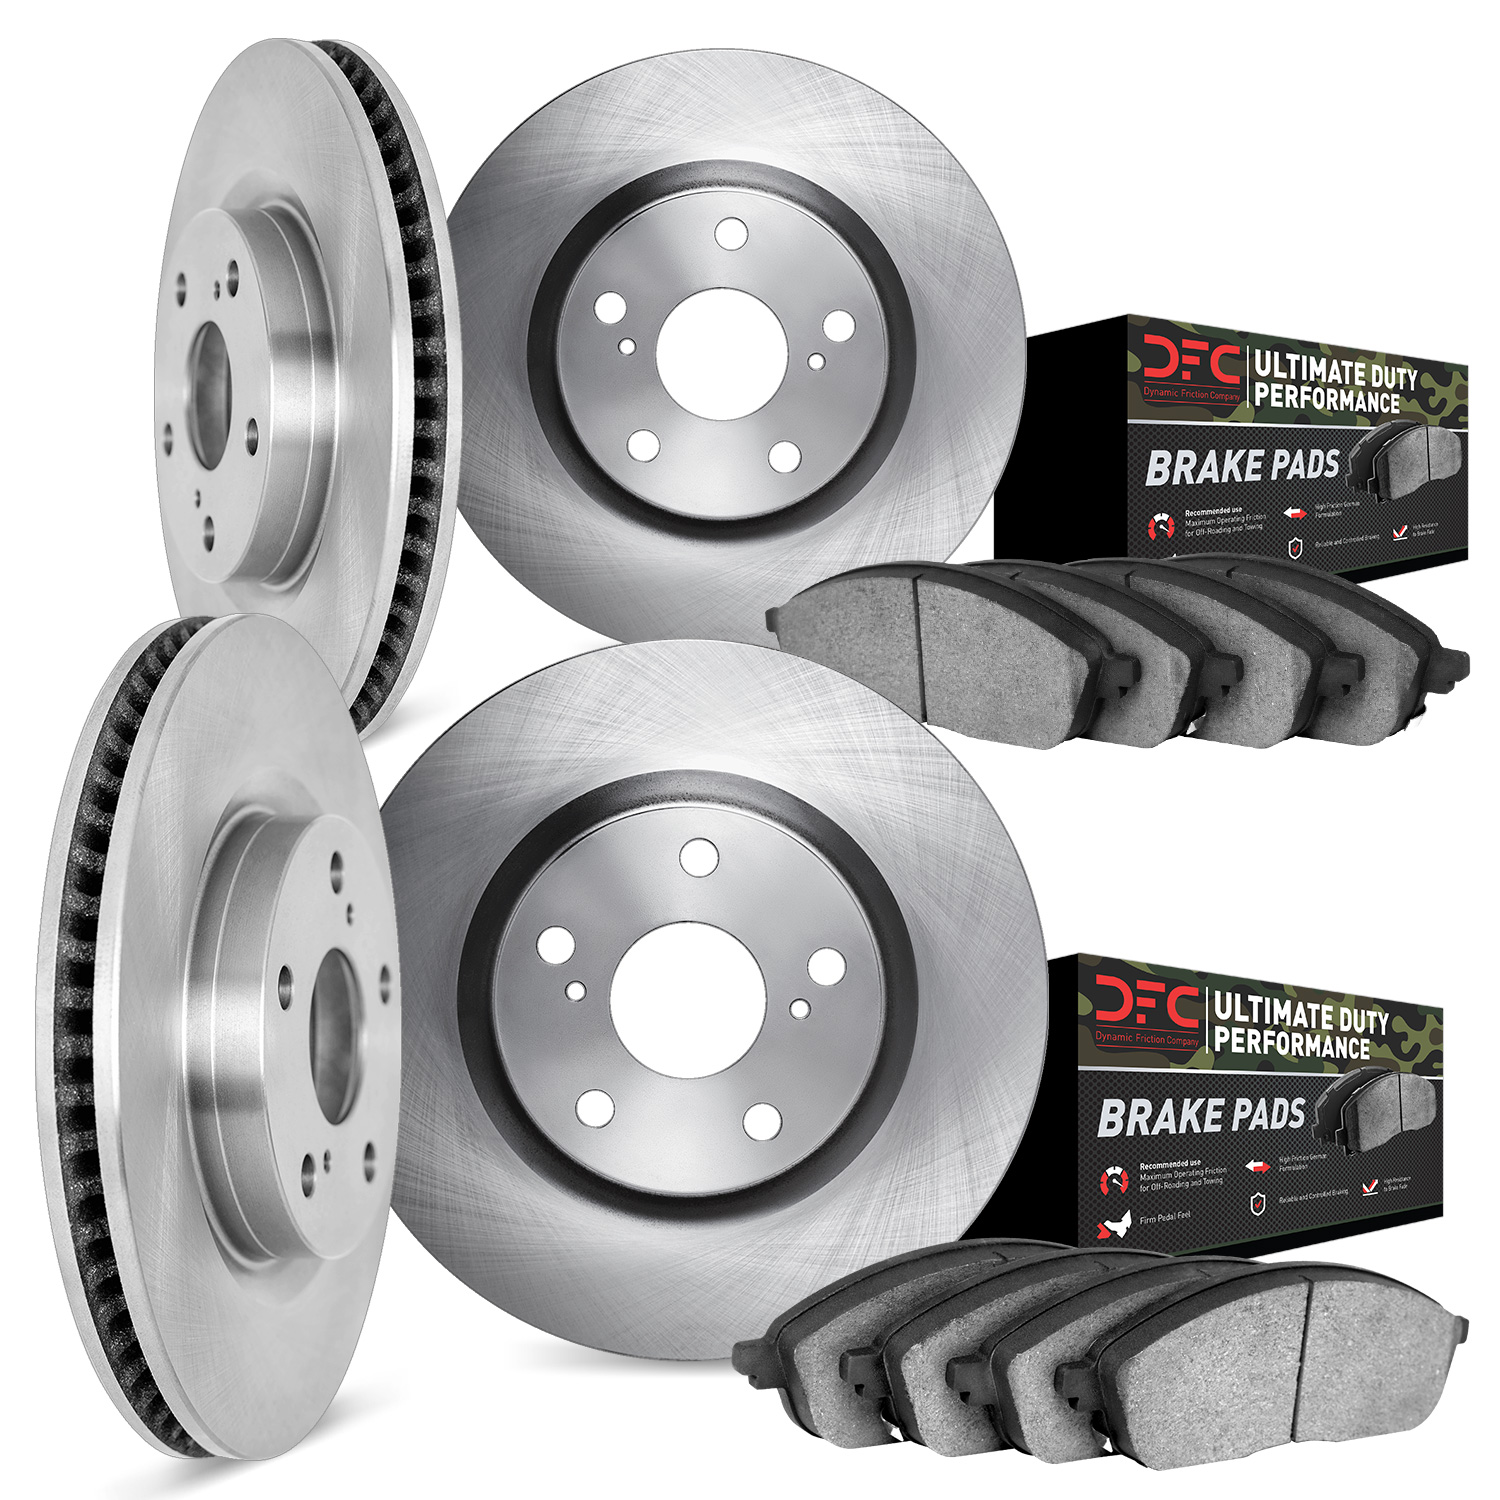 6404-76021 Brake Rotors with Ultimate-Duty Brake Pads, 2008-2021 Lexus/Toyota/Scion, Position: Front and Rear